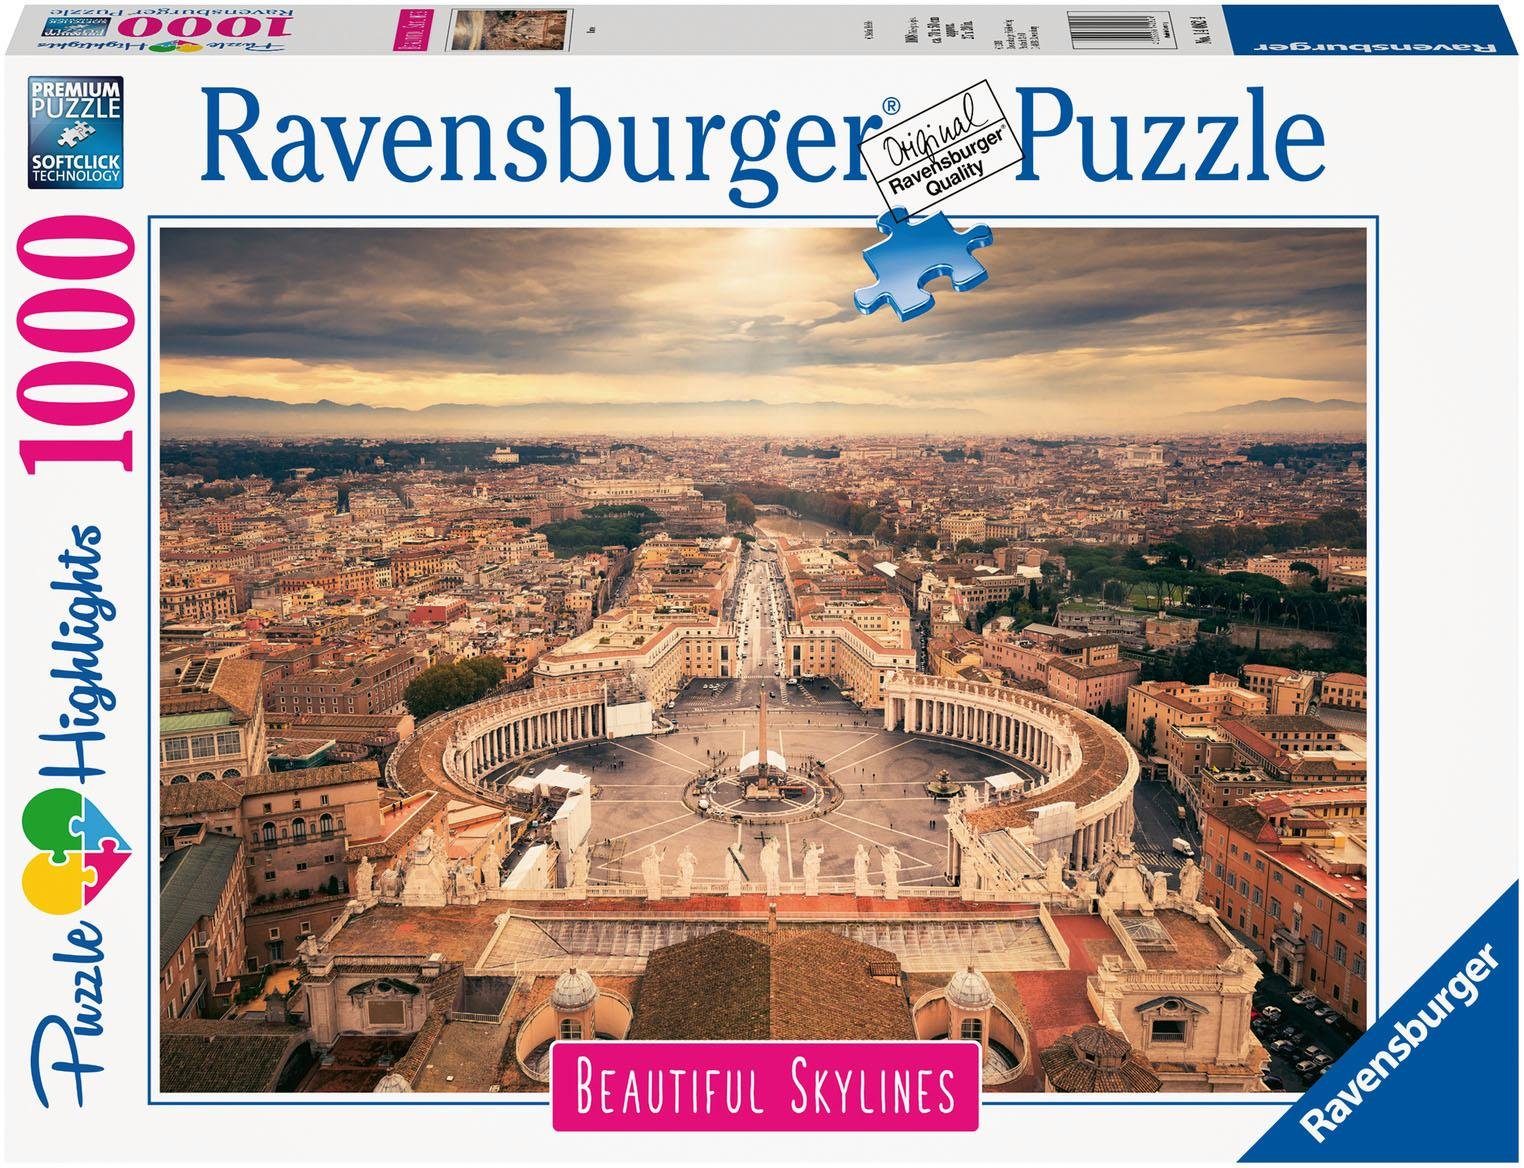 1000 schützt - Skylines - Beautiful - Puzzle Made Ravensburger Puzzle in Puzzleteile, Highlights Germany, Rome, weltweit FSC® Wald